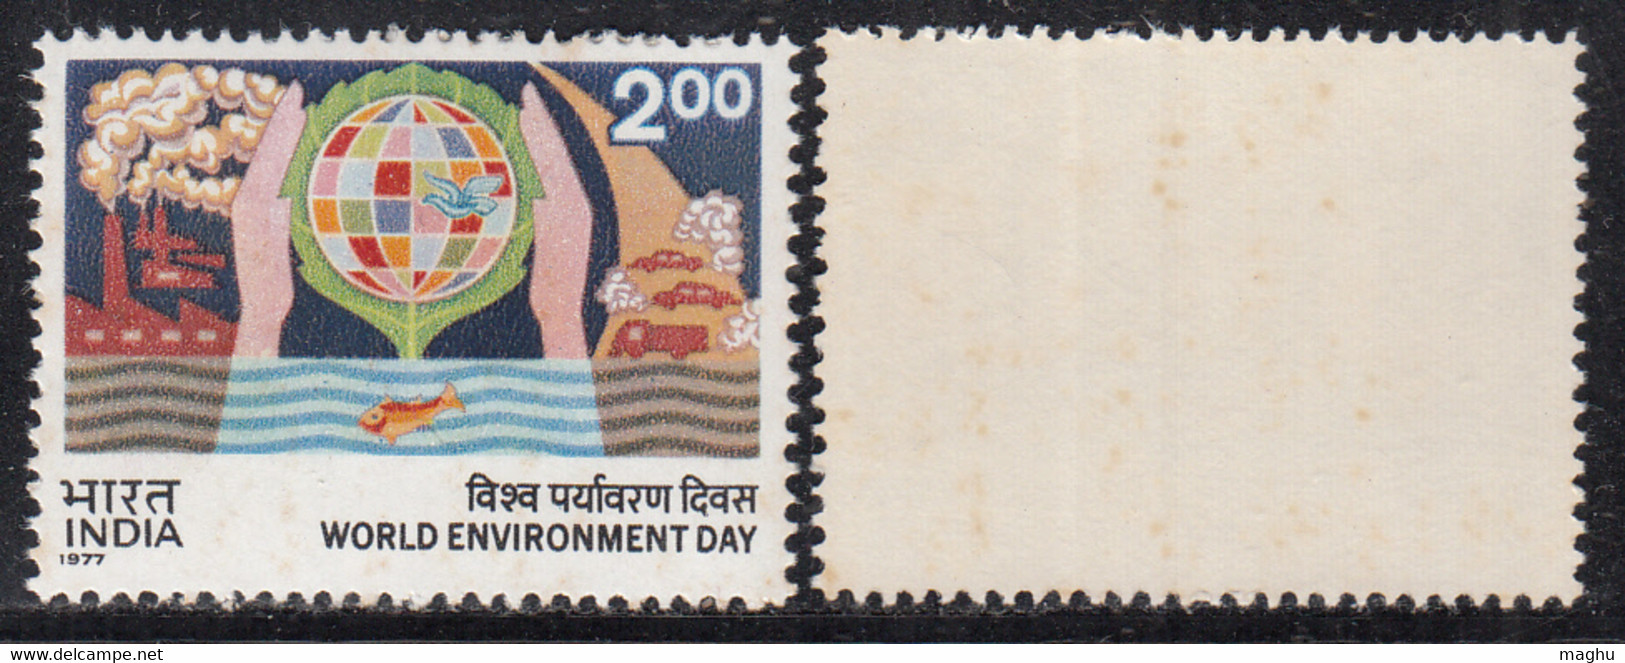 India 1977 MNH, World Environment Day, Hand, Globe Pollution, Fish, Bird, Car, Automobile, Nature, Climate, Stain @ Back - Polucion